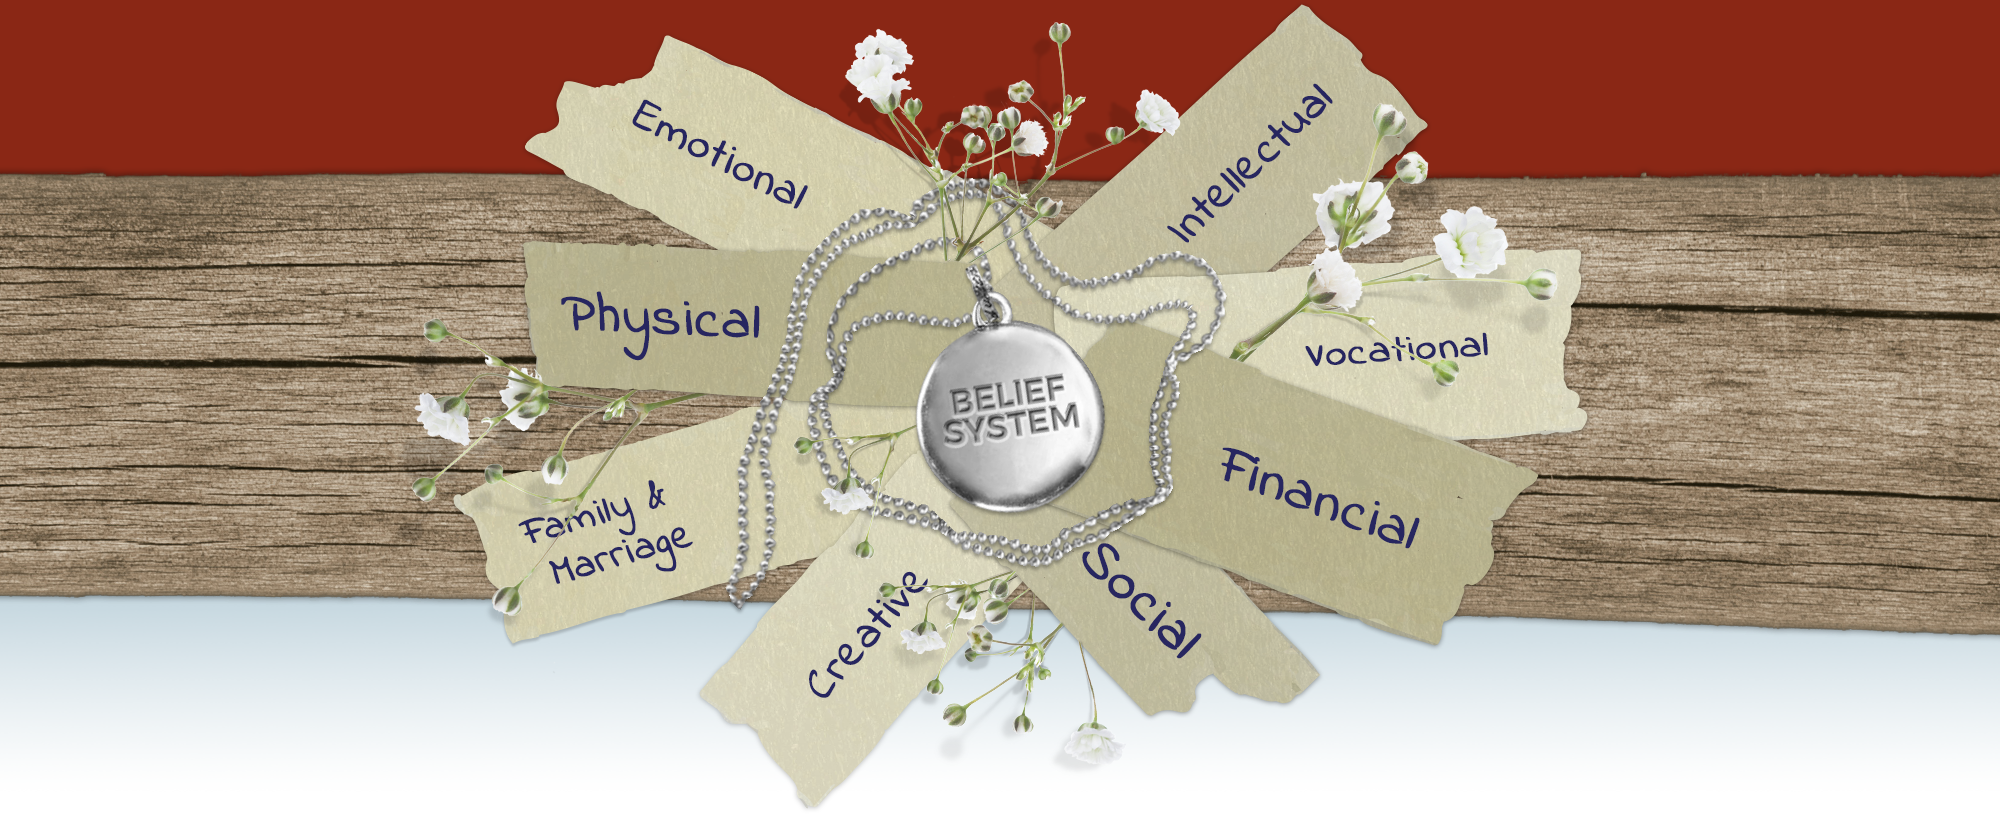 8 dimensions encircling a belief system in the center: Emotional, physical, family & marriage, creative, intellectual, vocational, financial, and social